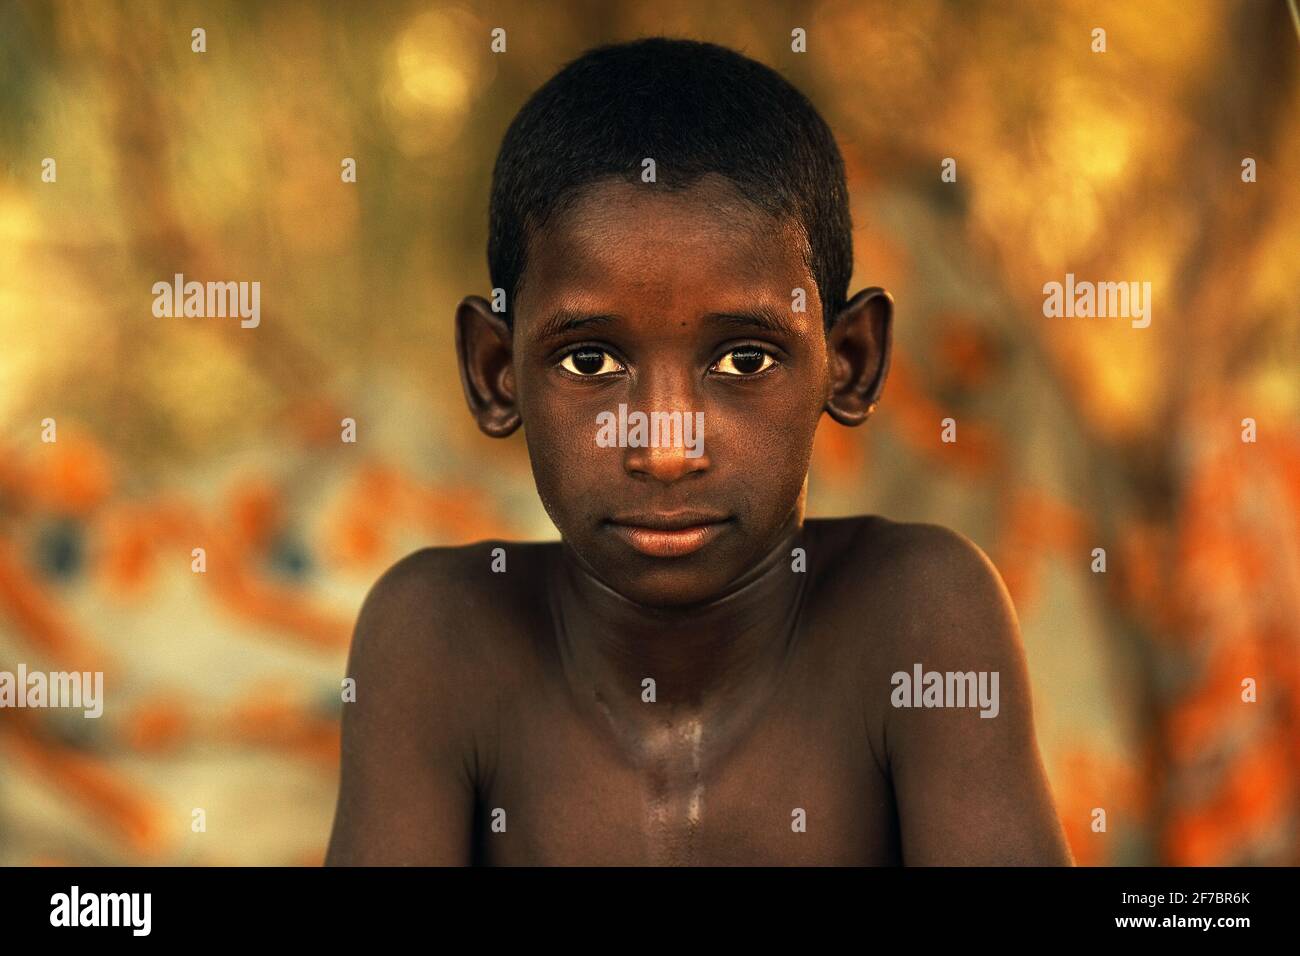 Portrait of young boy in Mali , West Africa Stock Photo